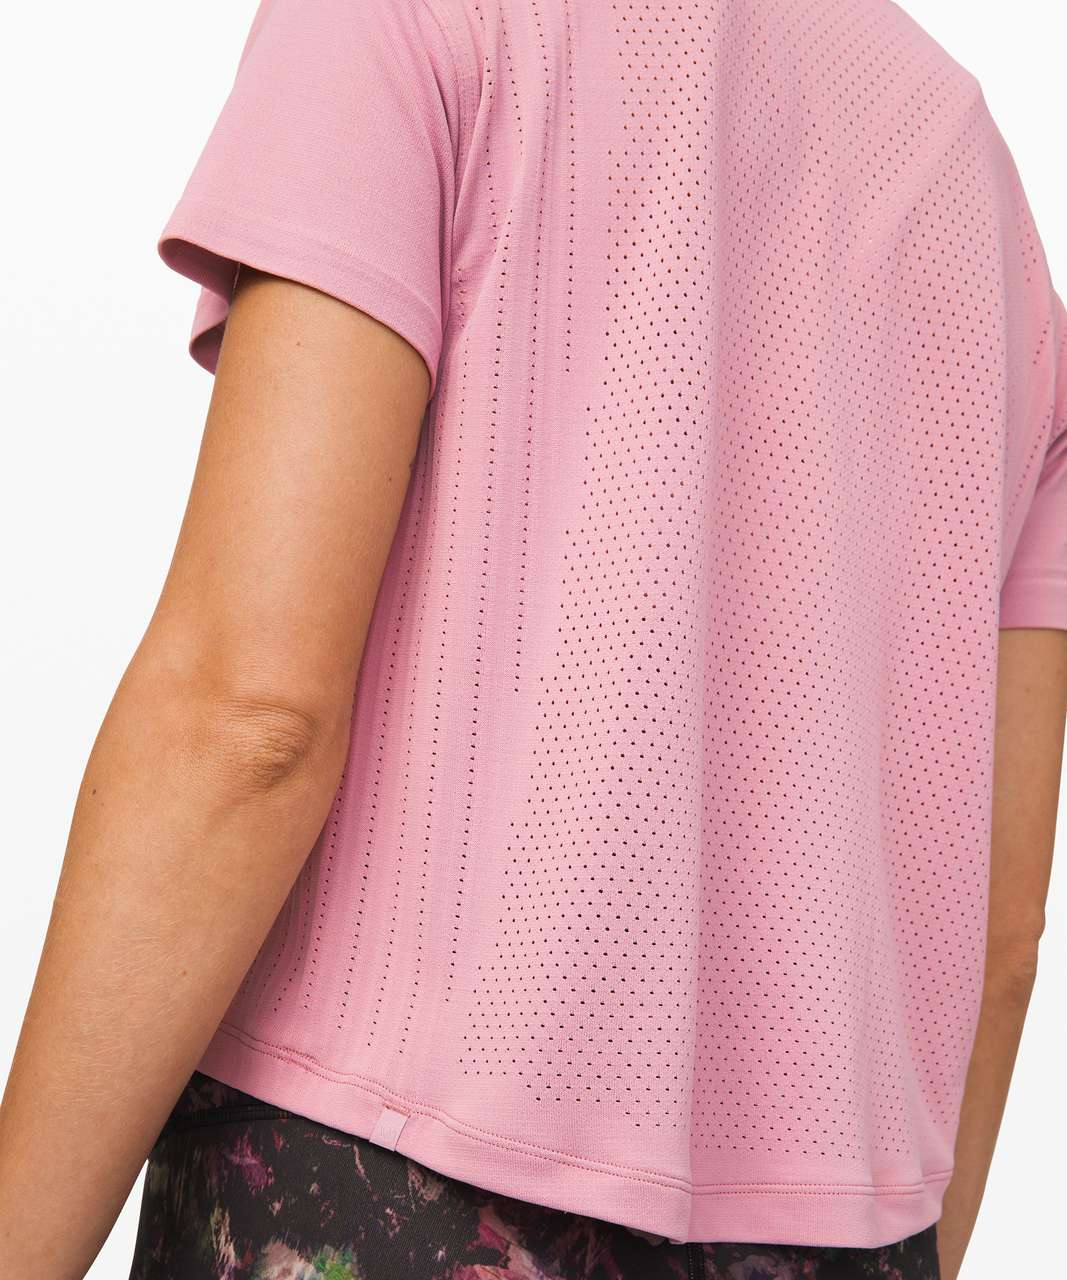 Lululemon Train to Be Short Sleeve - Pink Taupe / Pink Taupe (First Release)